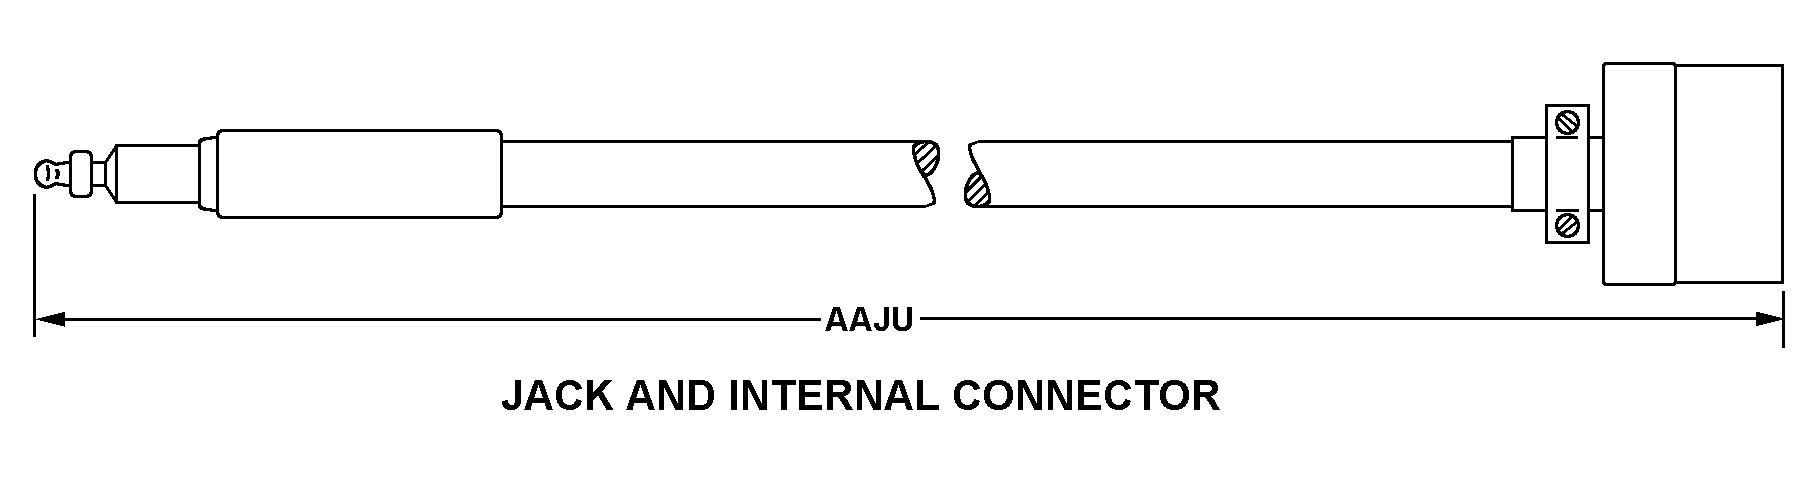 JACK AND INTERNAL CONNECTOR style nsn 5995-01-323-5895